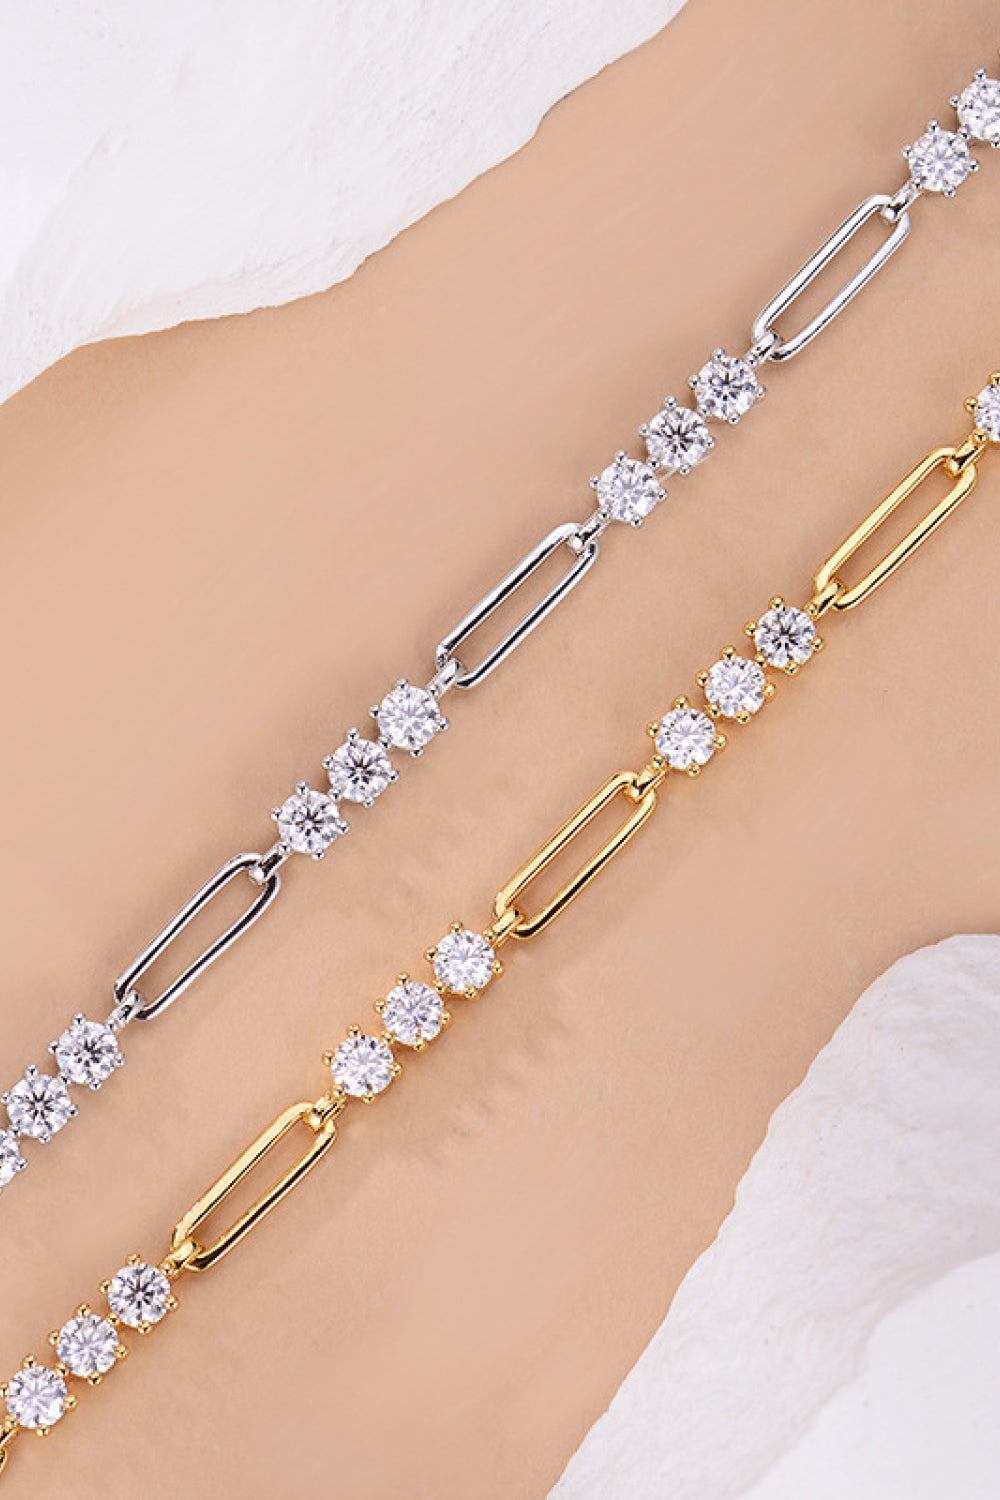 1.8 Carat Moissanite 925 Sterling Silver Bracelet - Kawaii Stop - 1.8 Carat, 925 Sterling Silver, Bracelet, Bracelets, Easy Care, Imported, Jewelry, Minimalist Style, Moissanite Bracelet, Premium Materials, Ship From Overseas, Shipping Delay 09/29/2023 - 10/04/2023, Y.T